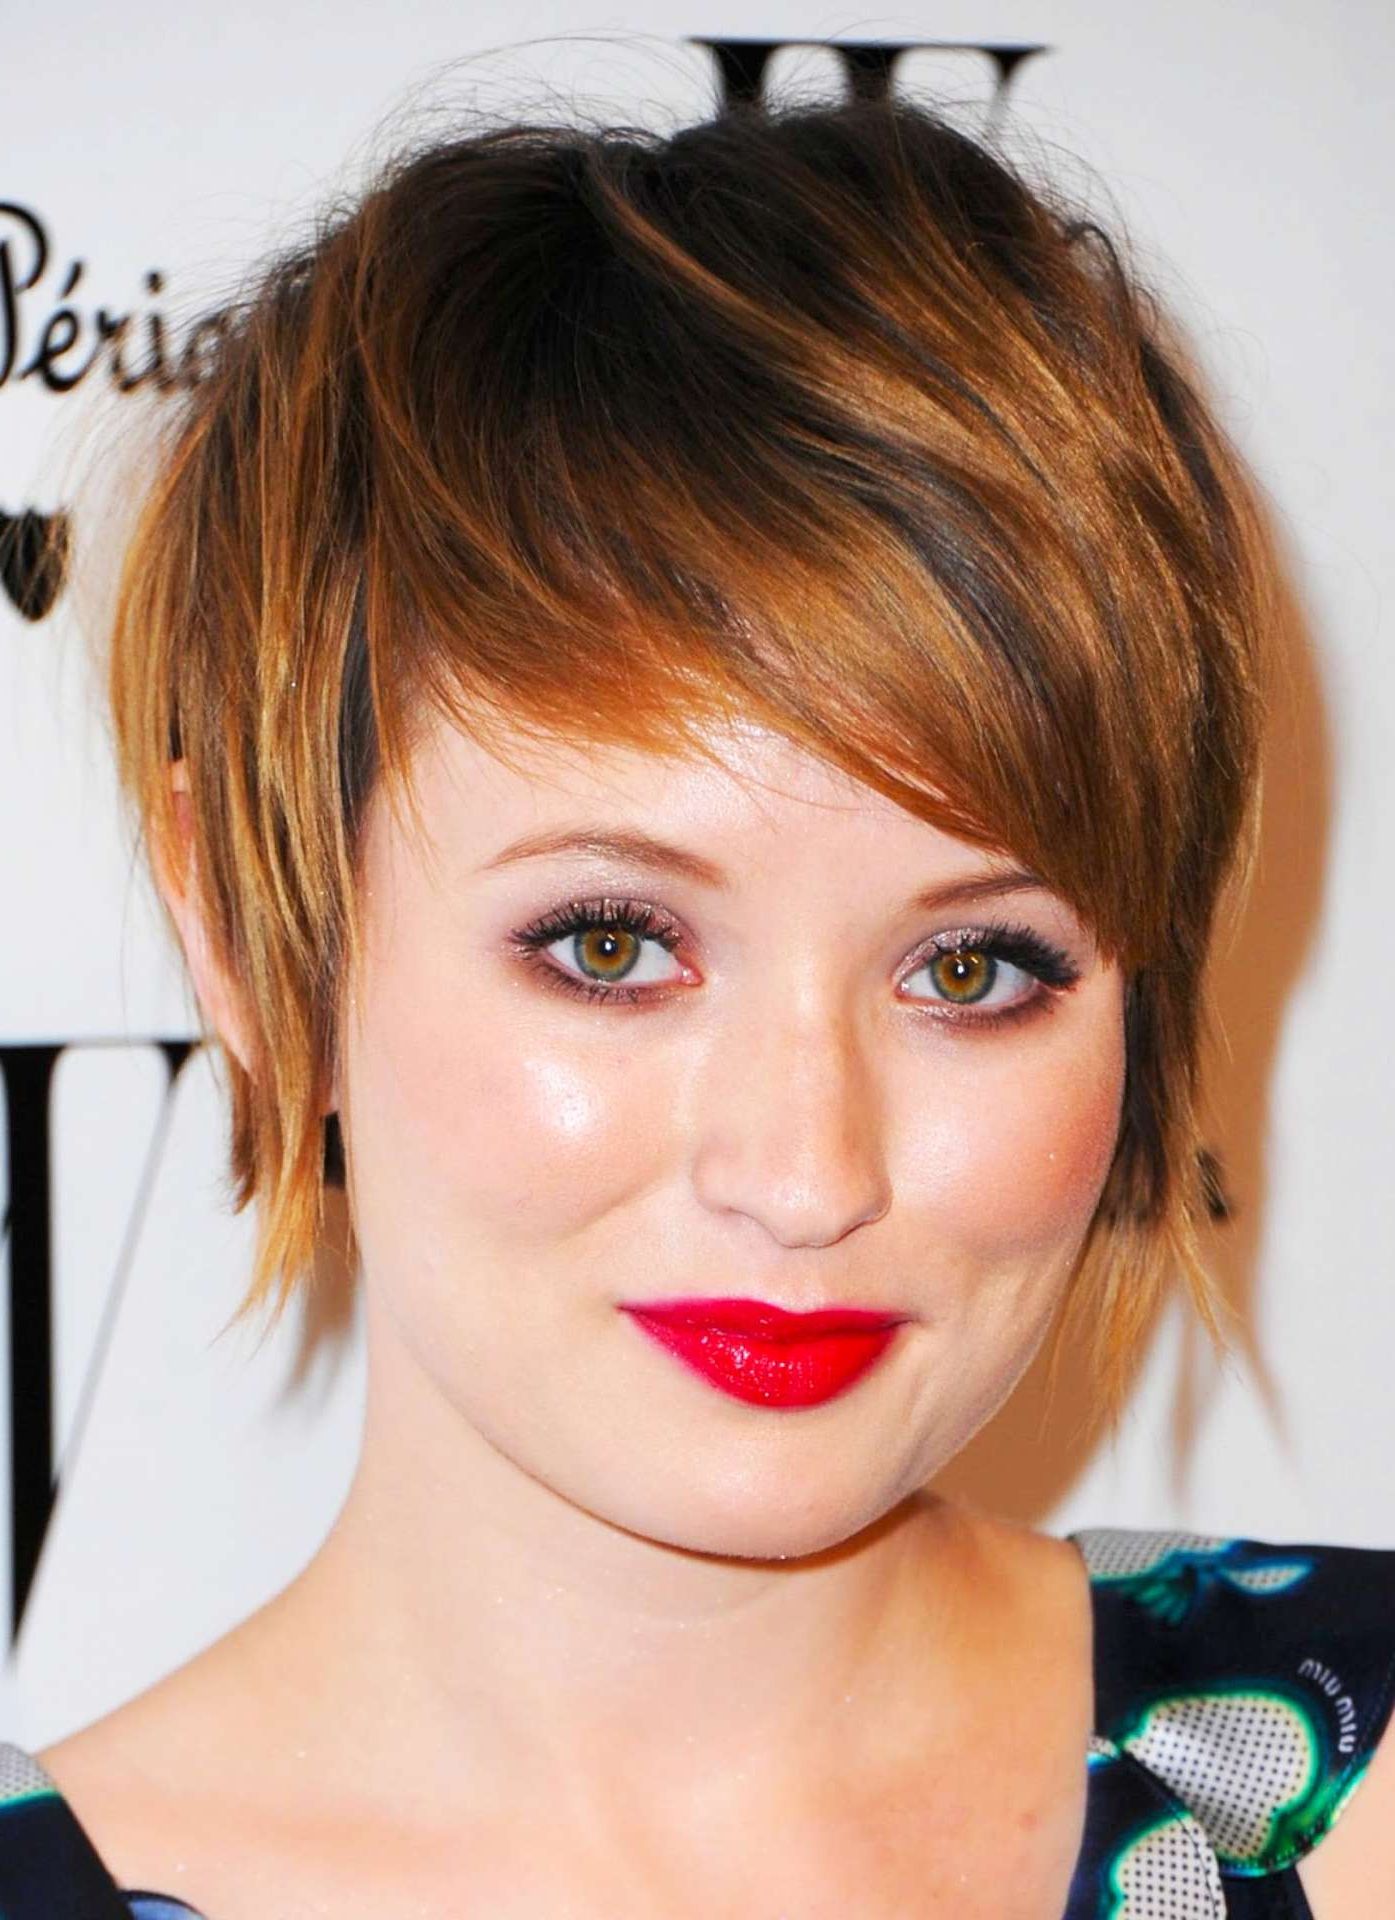 14 Best Short Haircuts For Women With Round Faces With Short Haircuts For Fat Faces (View 7 of 25)